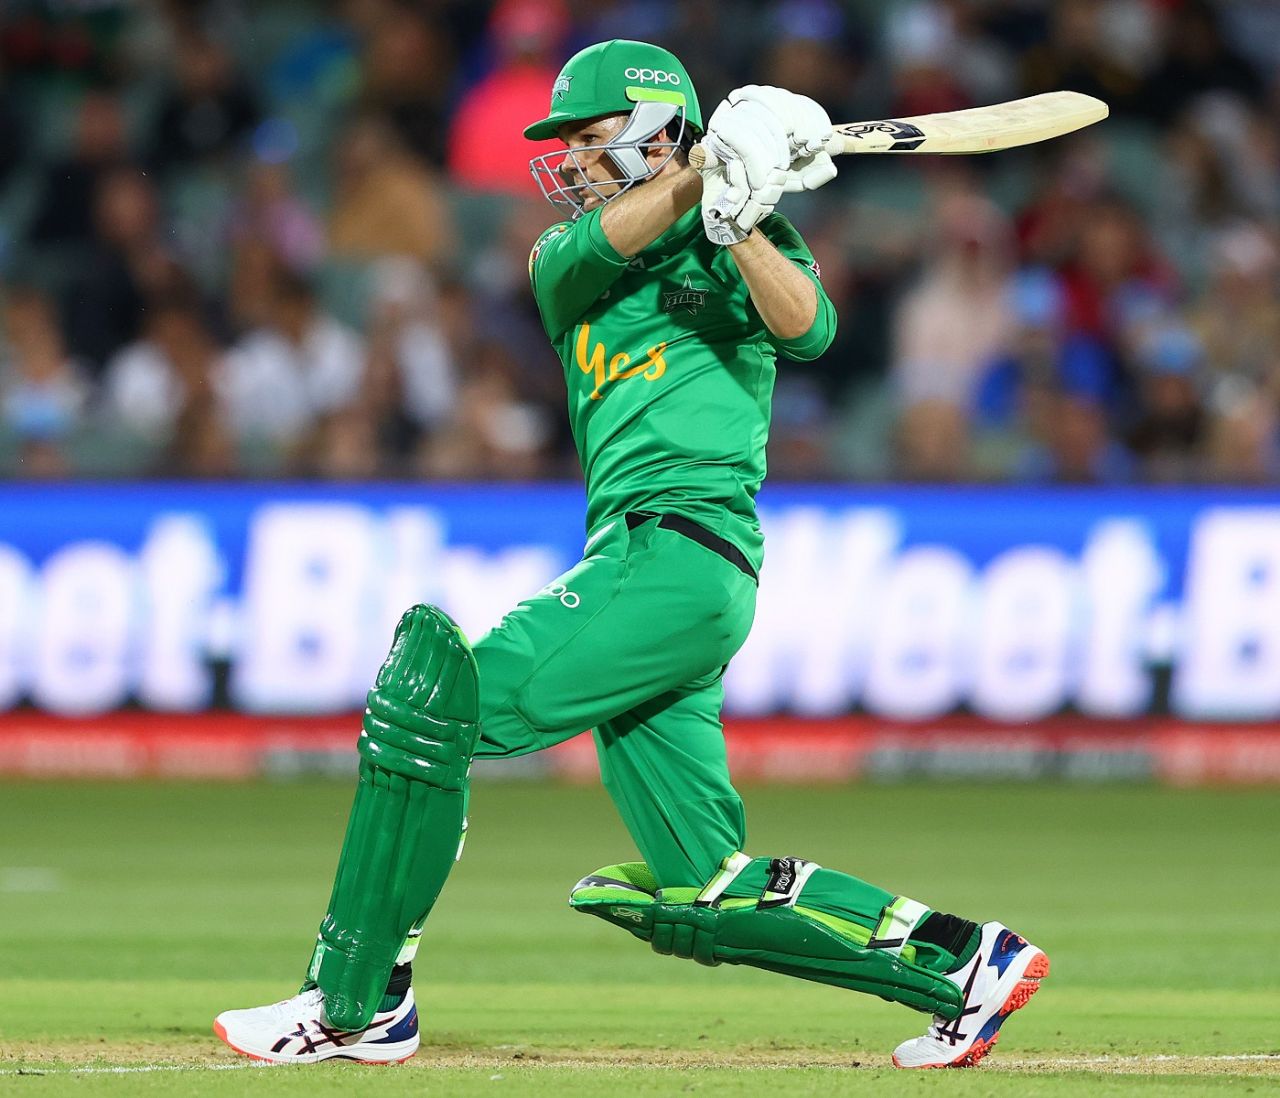 Peter Handscomb top-scored in the Stars' chase, Adelaide Strikers v Melbourne Stars, Big Bash League 2019-20, Adelaide, January 22, 2020